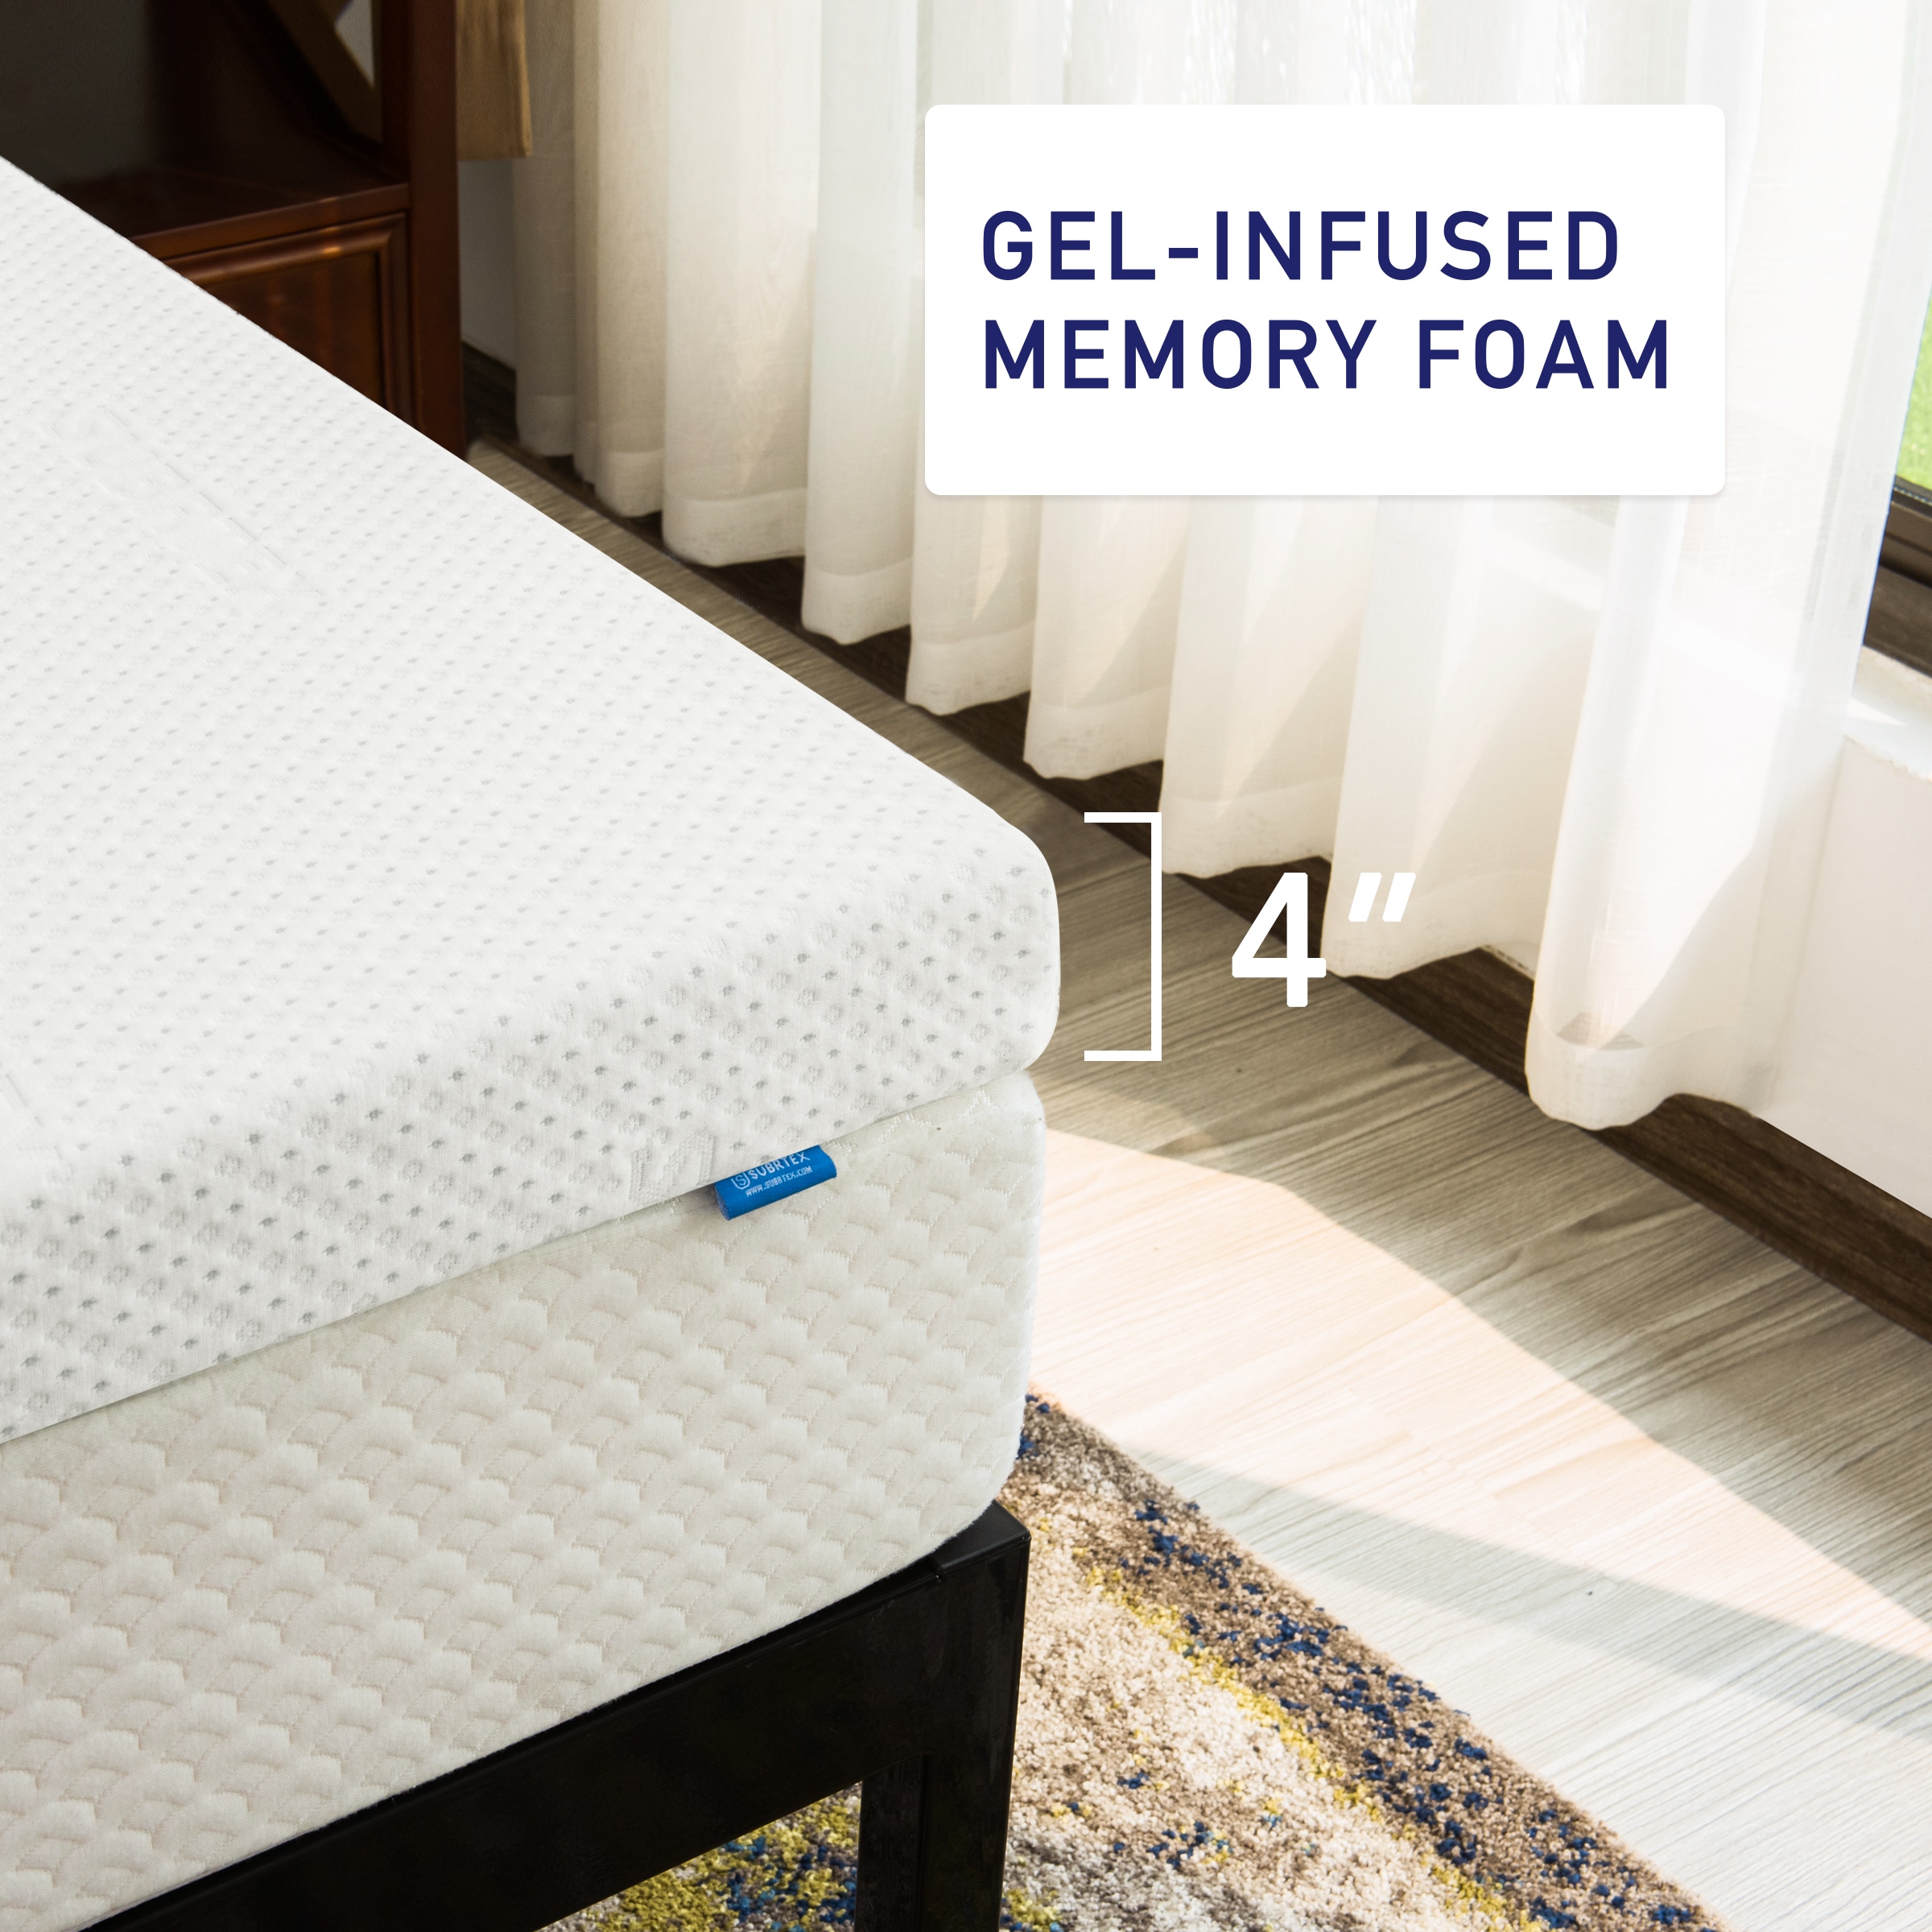 Subrtex 4 Inch Covered Gel-Infused Memory Foam Bed Mattress Topper